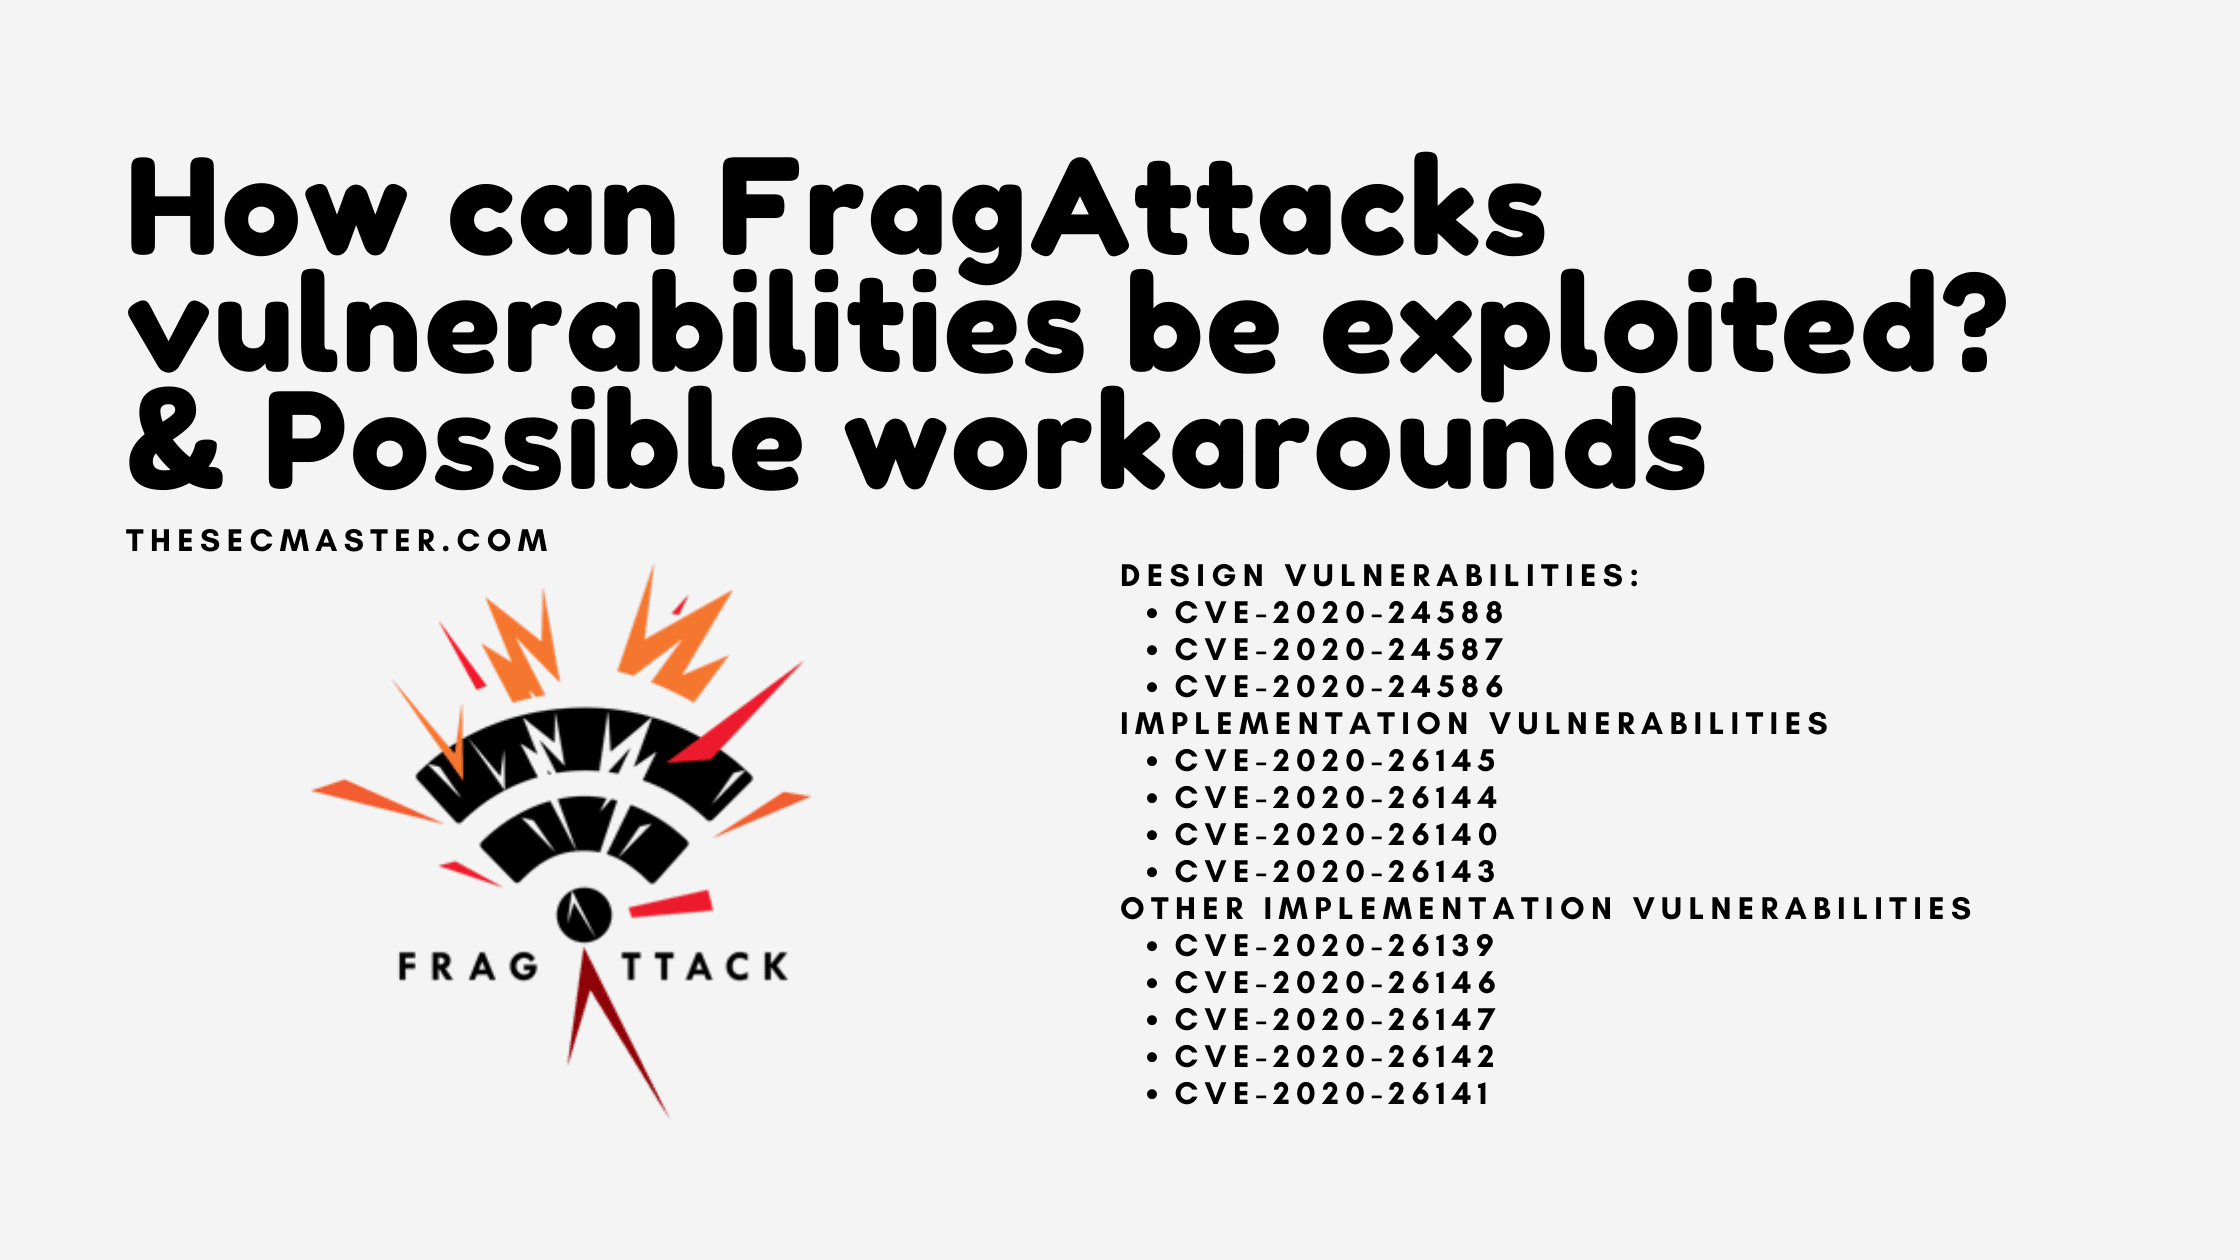 How Can Fragattacks Vulnerabilities Be Exploited Possible Workarounds